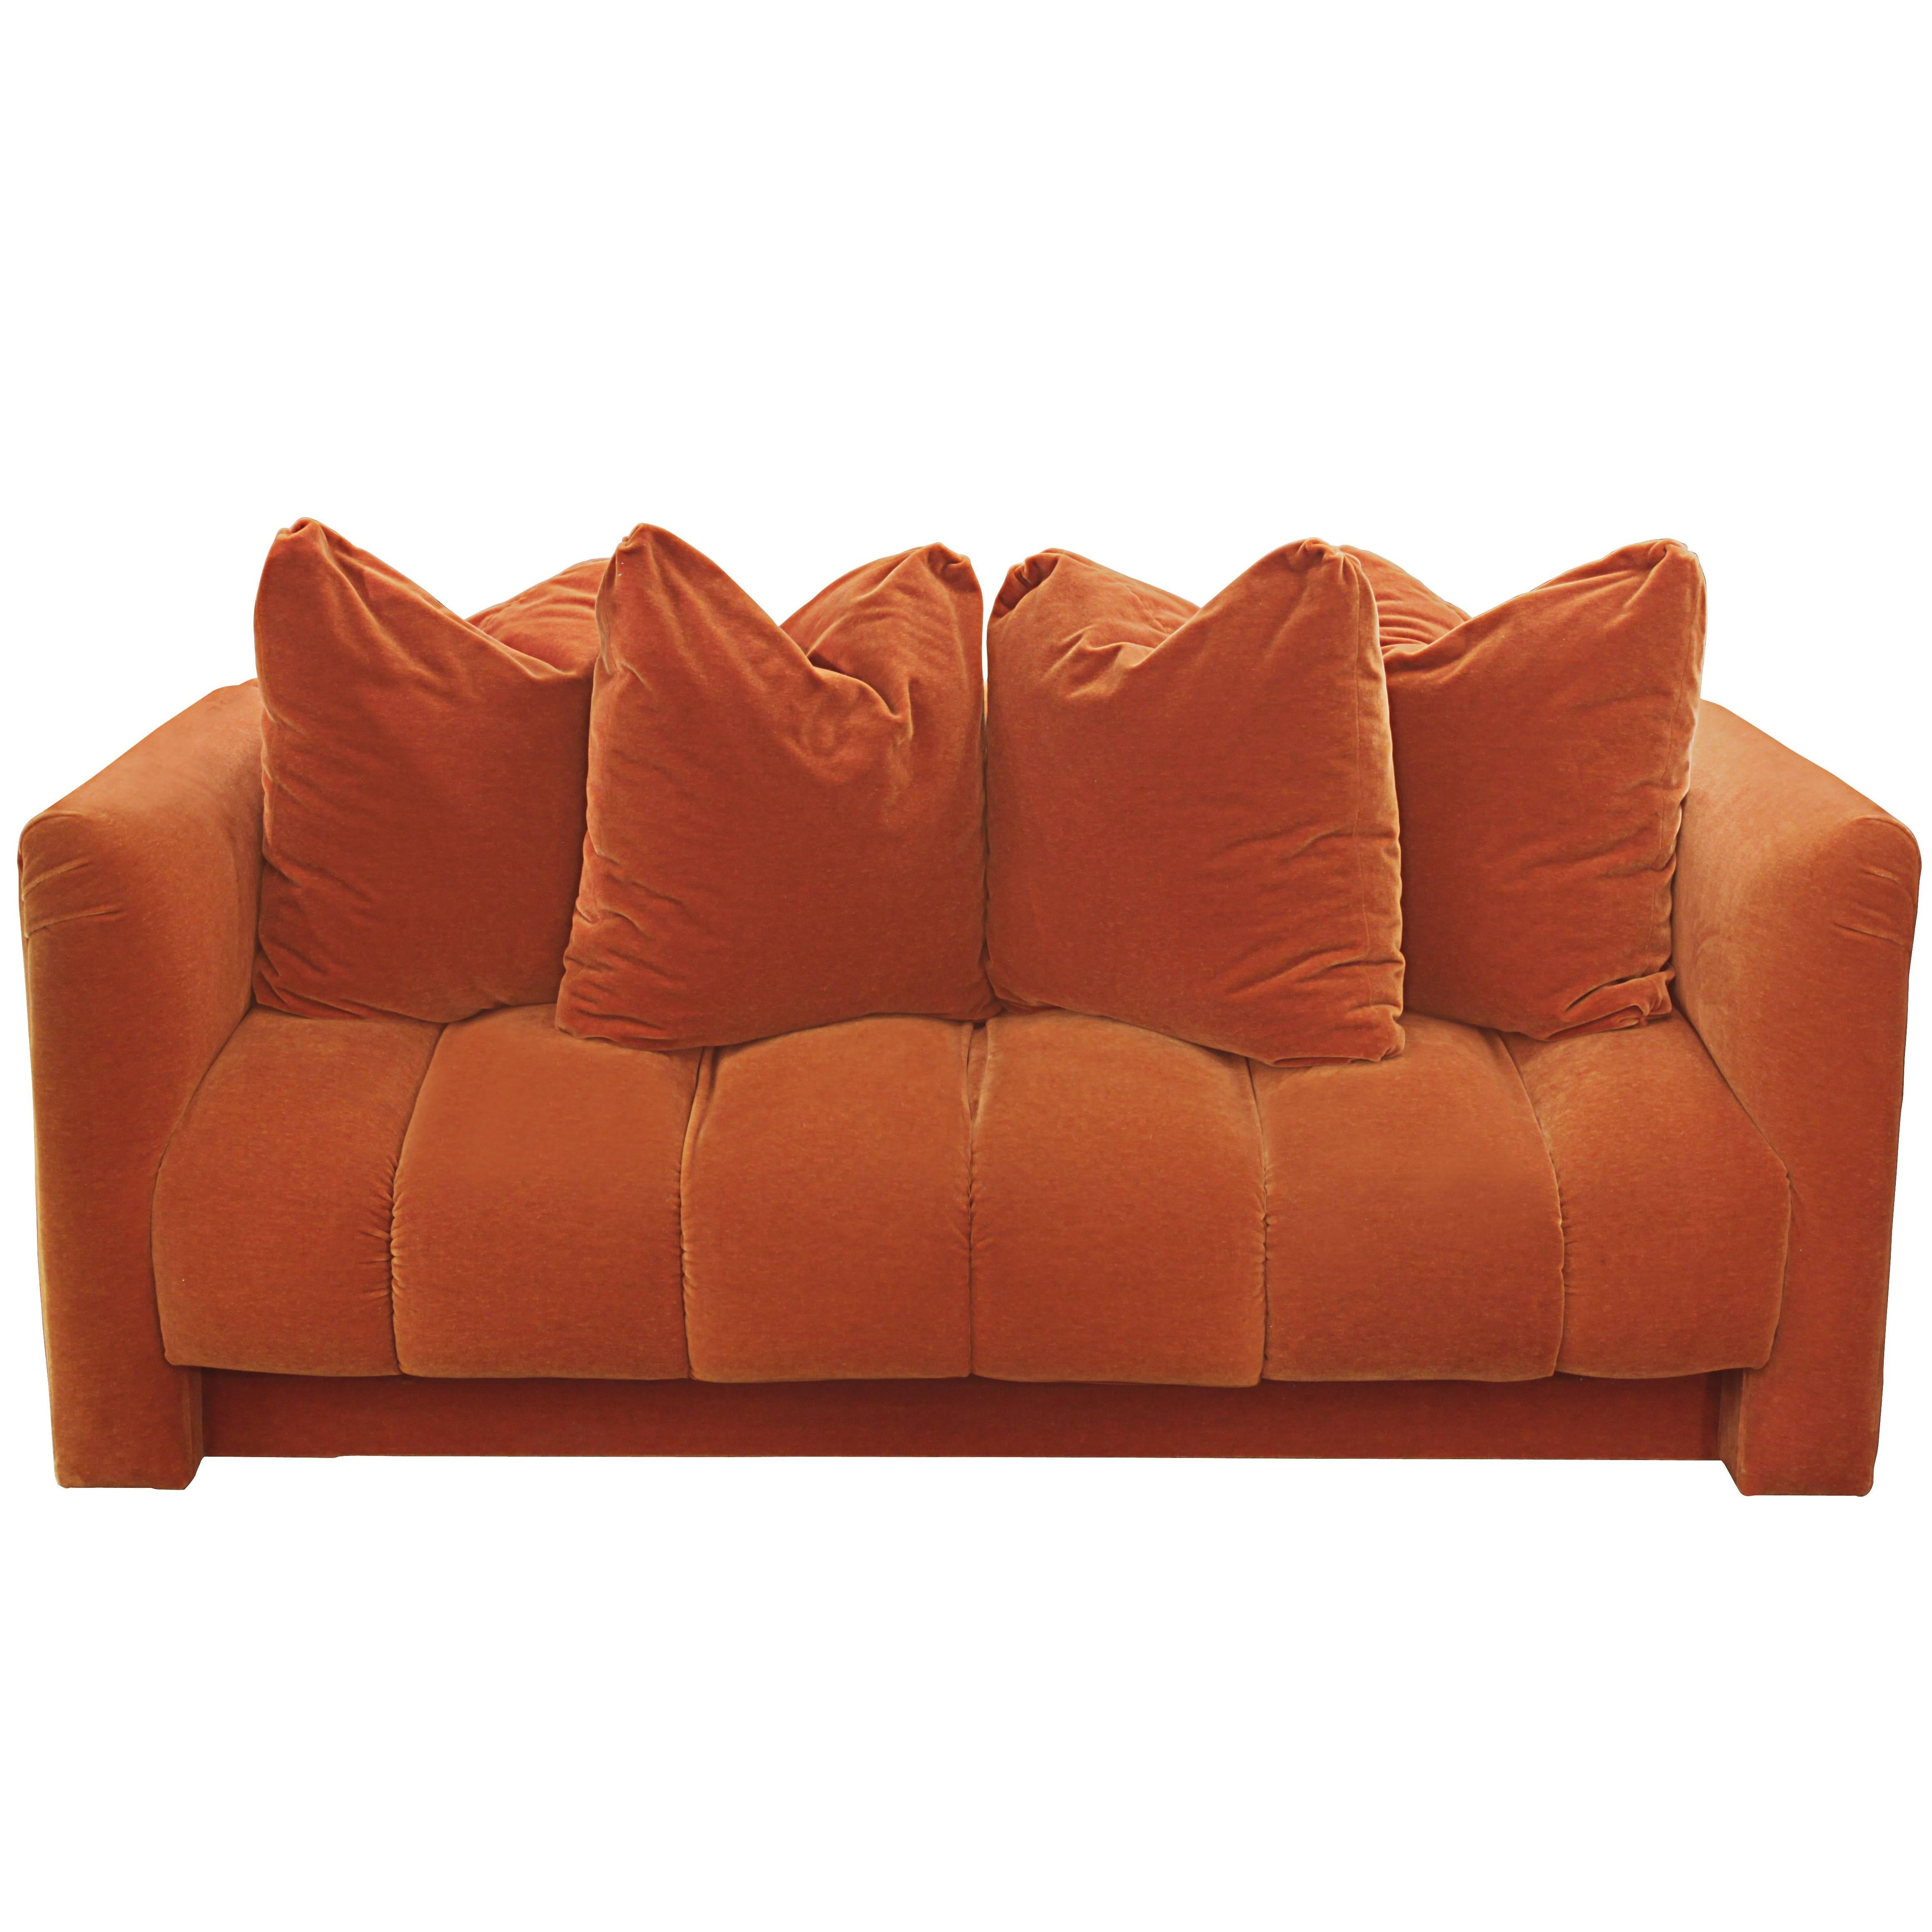 Settee with Channeled Design by Martin Brattrud for Steve Chase 